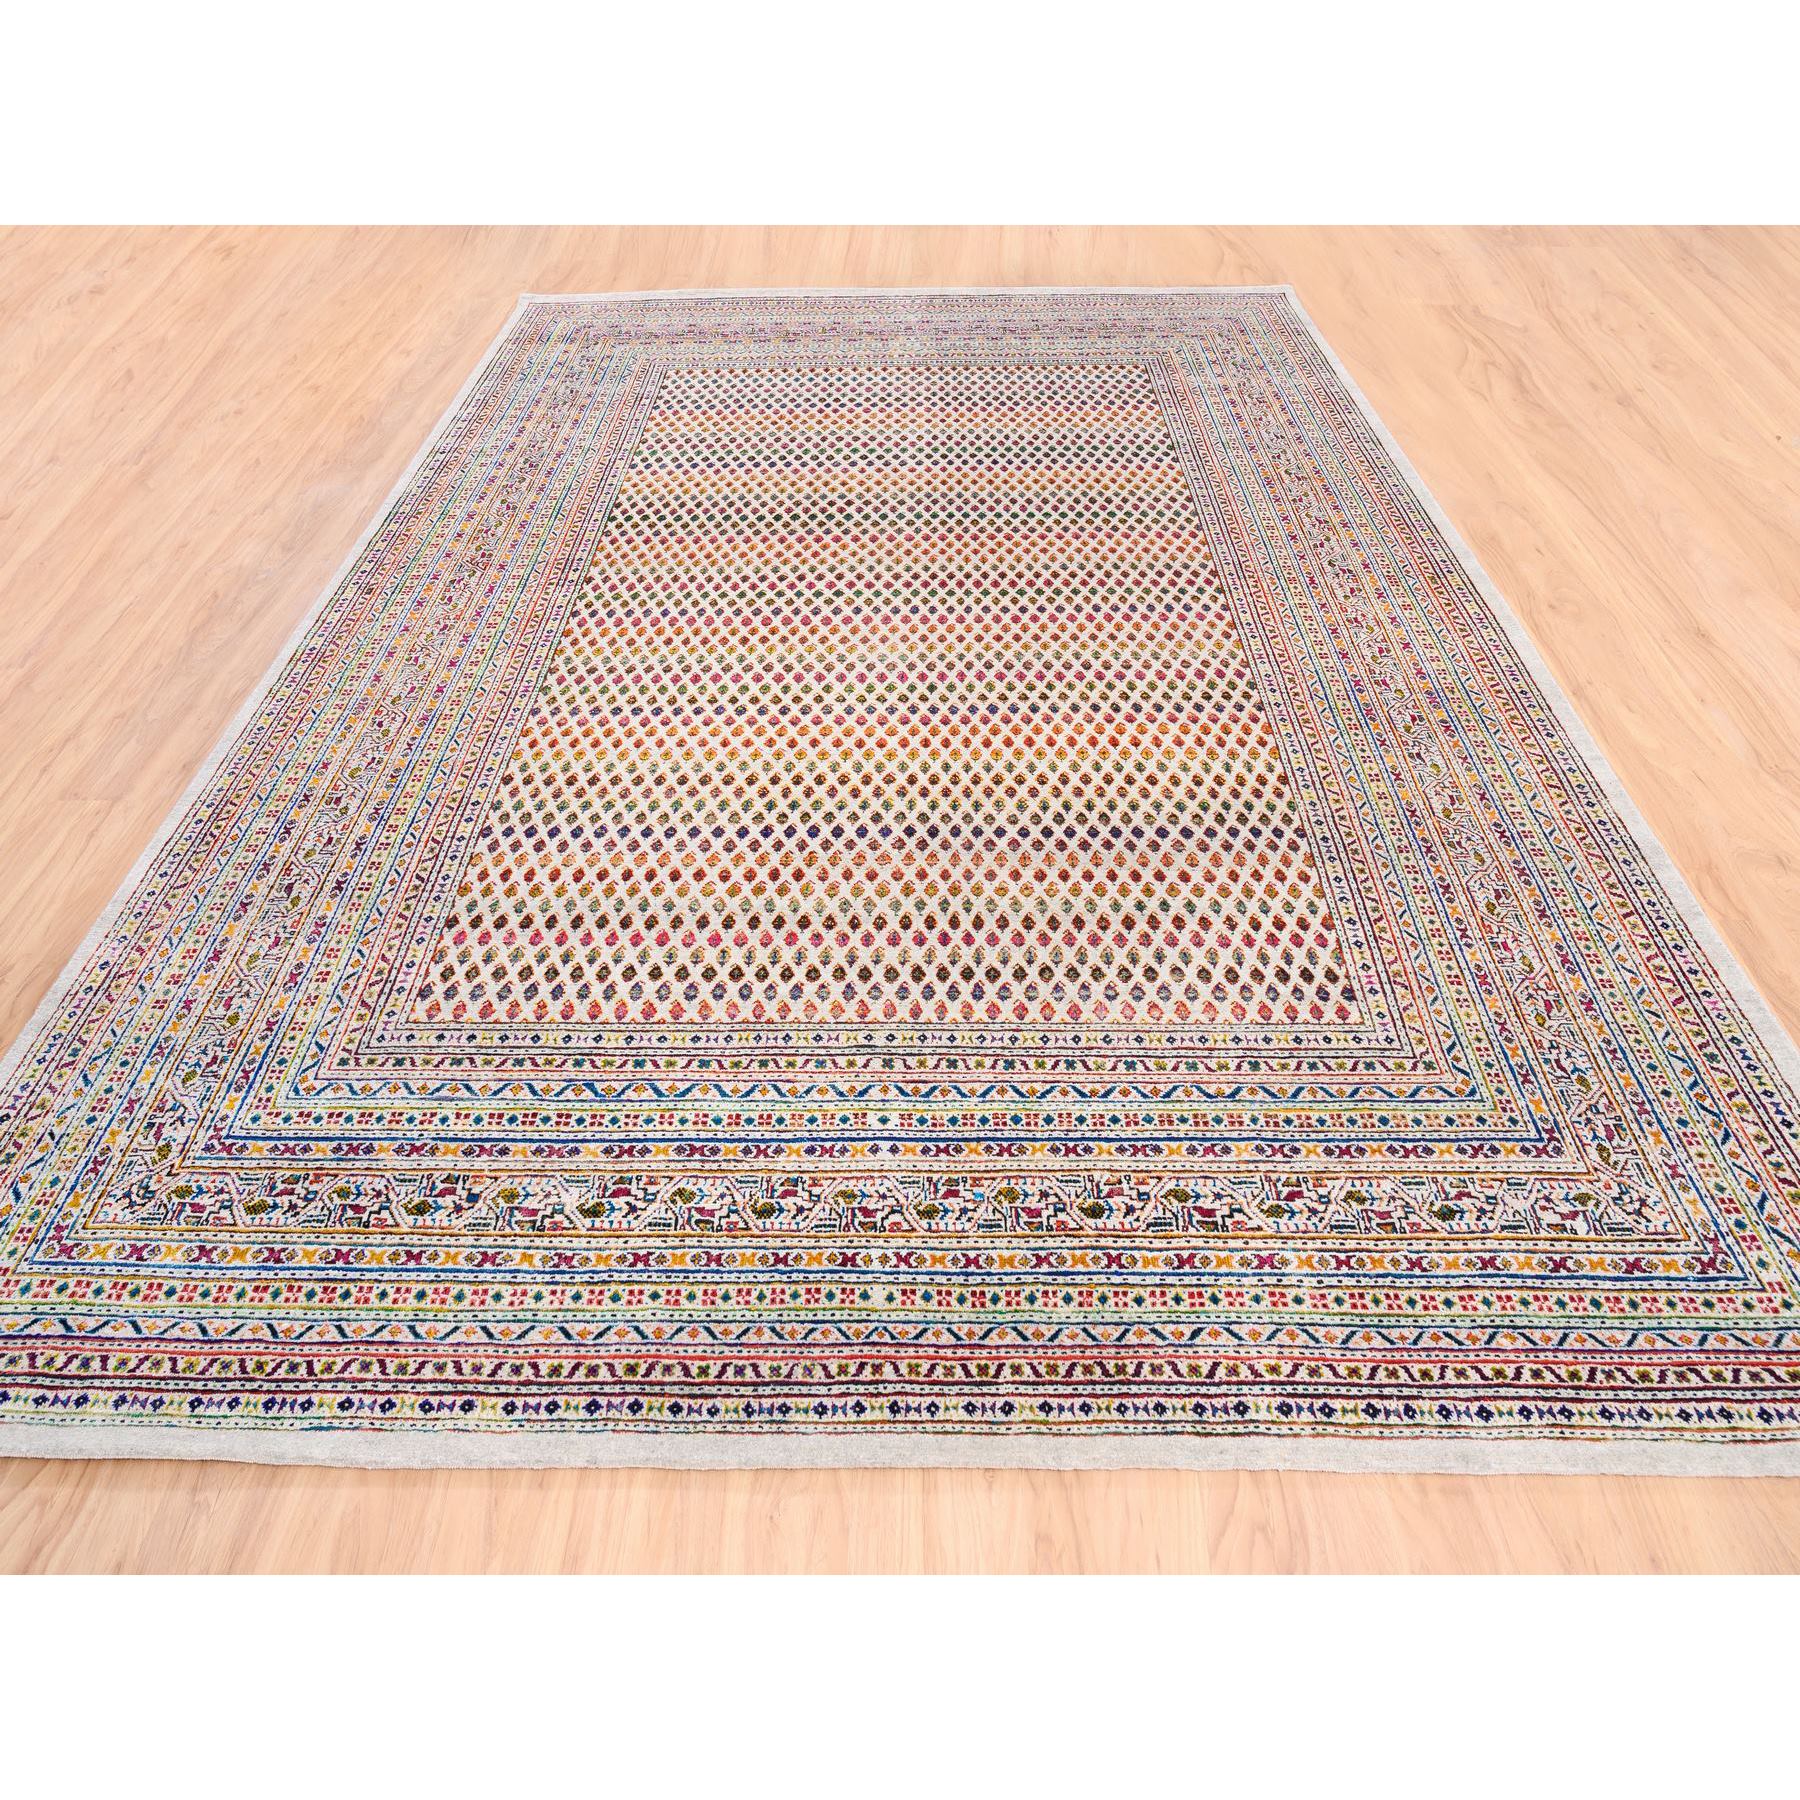 8'10"x12' Wool And Sari Silk Colorful Sarouk Mir Inspired with Repetitive Boteh Design Hand Woven Oriental Rug 